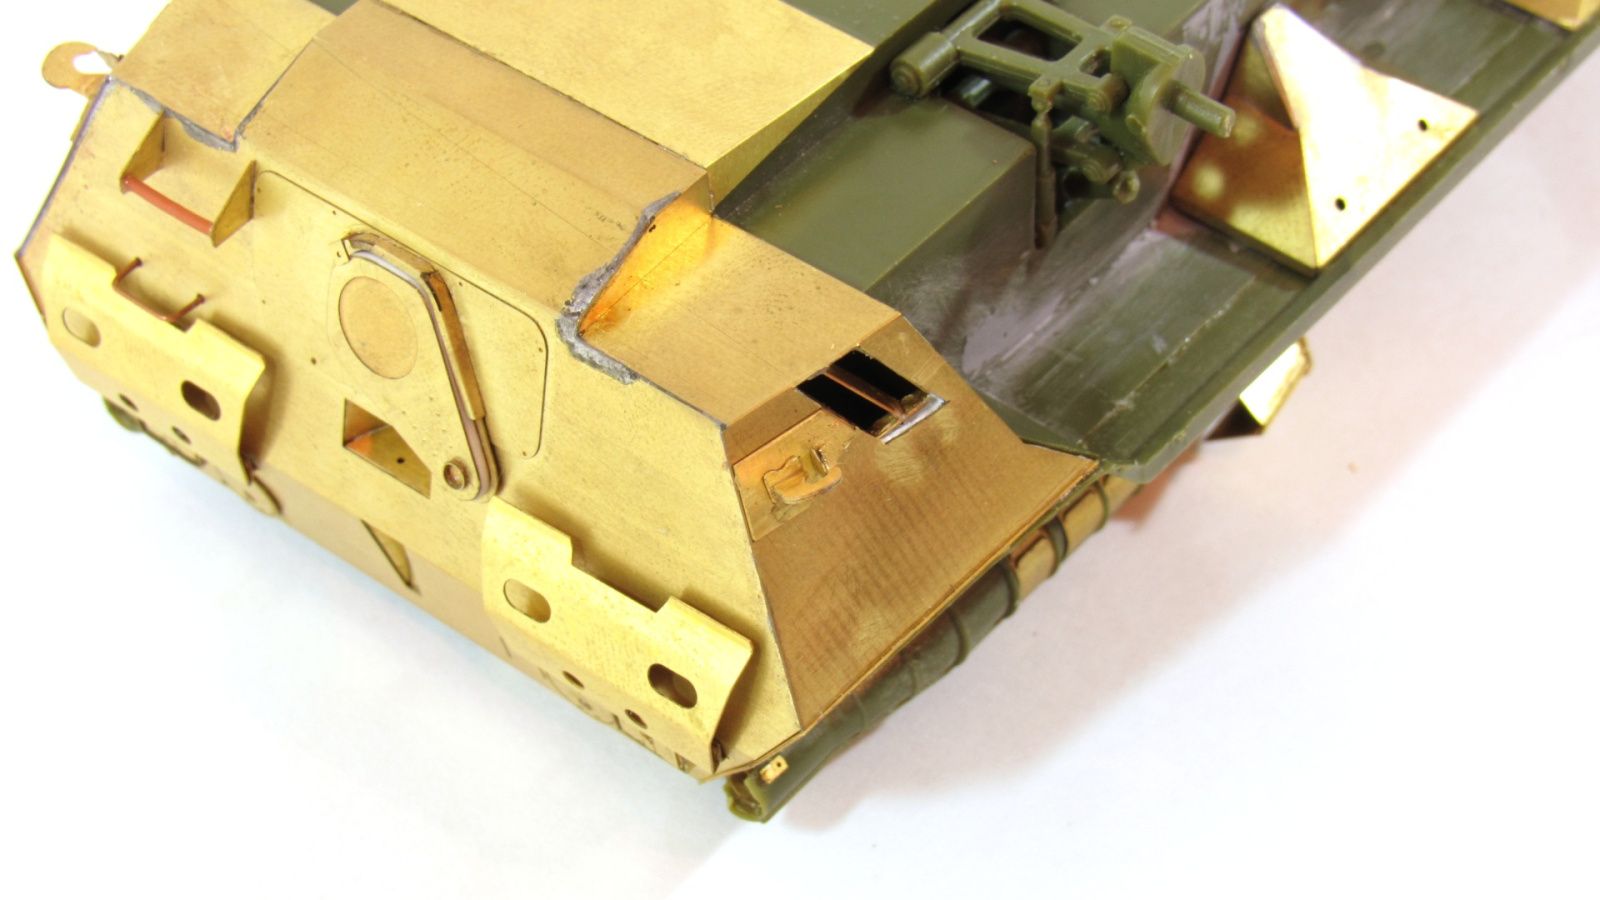 The feed part of the BTR-80 (star) - imodeller.store